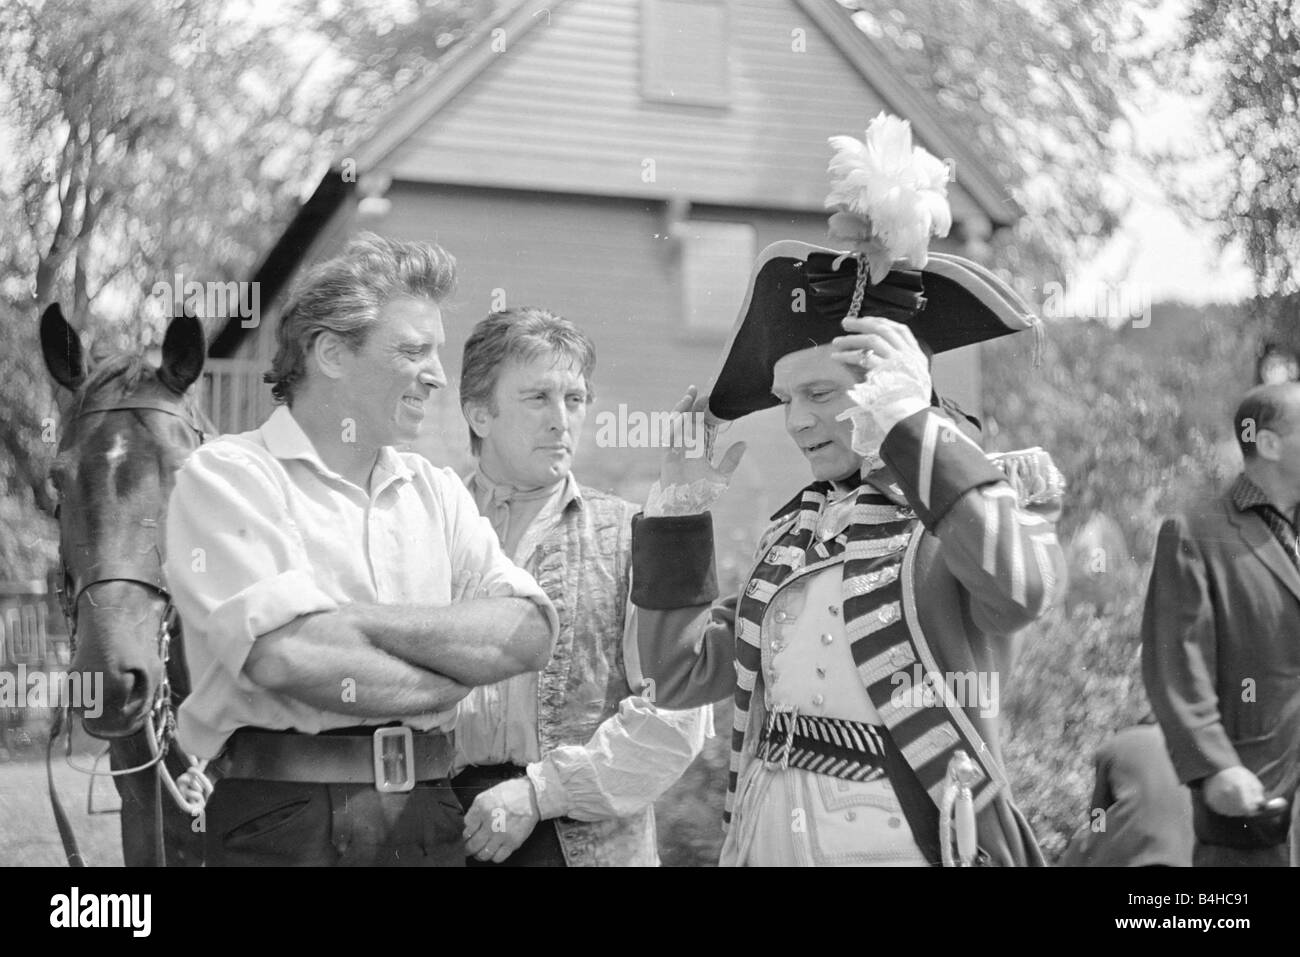 Burt Lancaster laughing with his actor colleagues during the filming of The Devils Disciple Film 18th century clothing hat wiuth fedder horse hats outdoors July 1958 1950s Mirrorpix Stock Photo